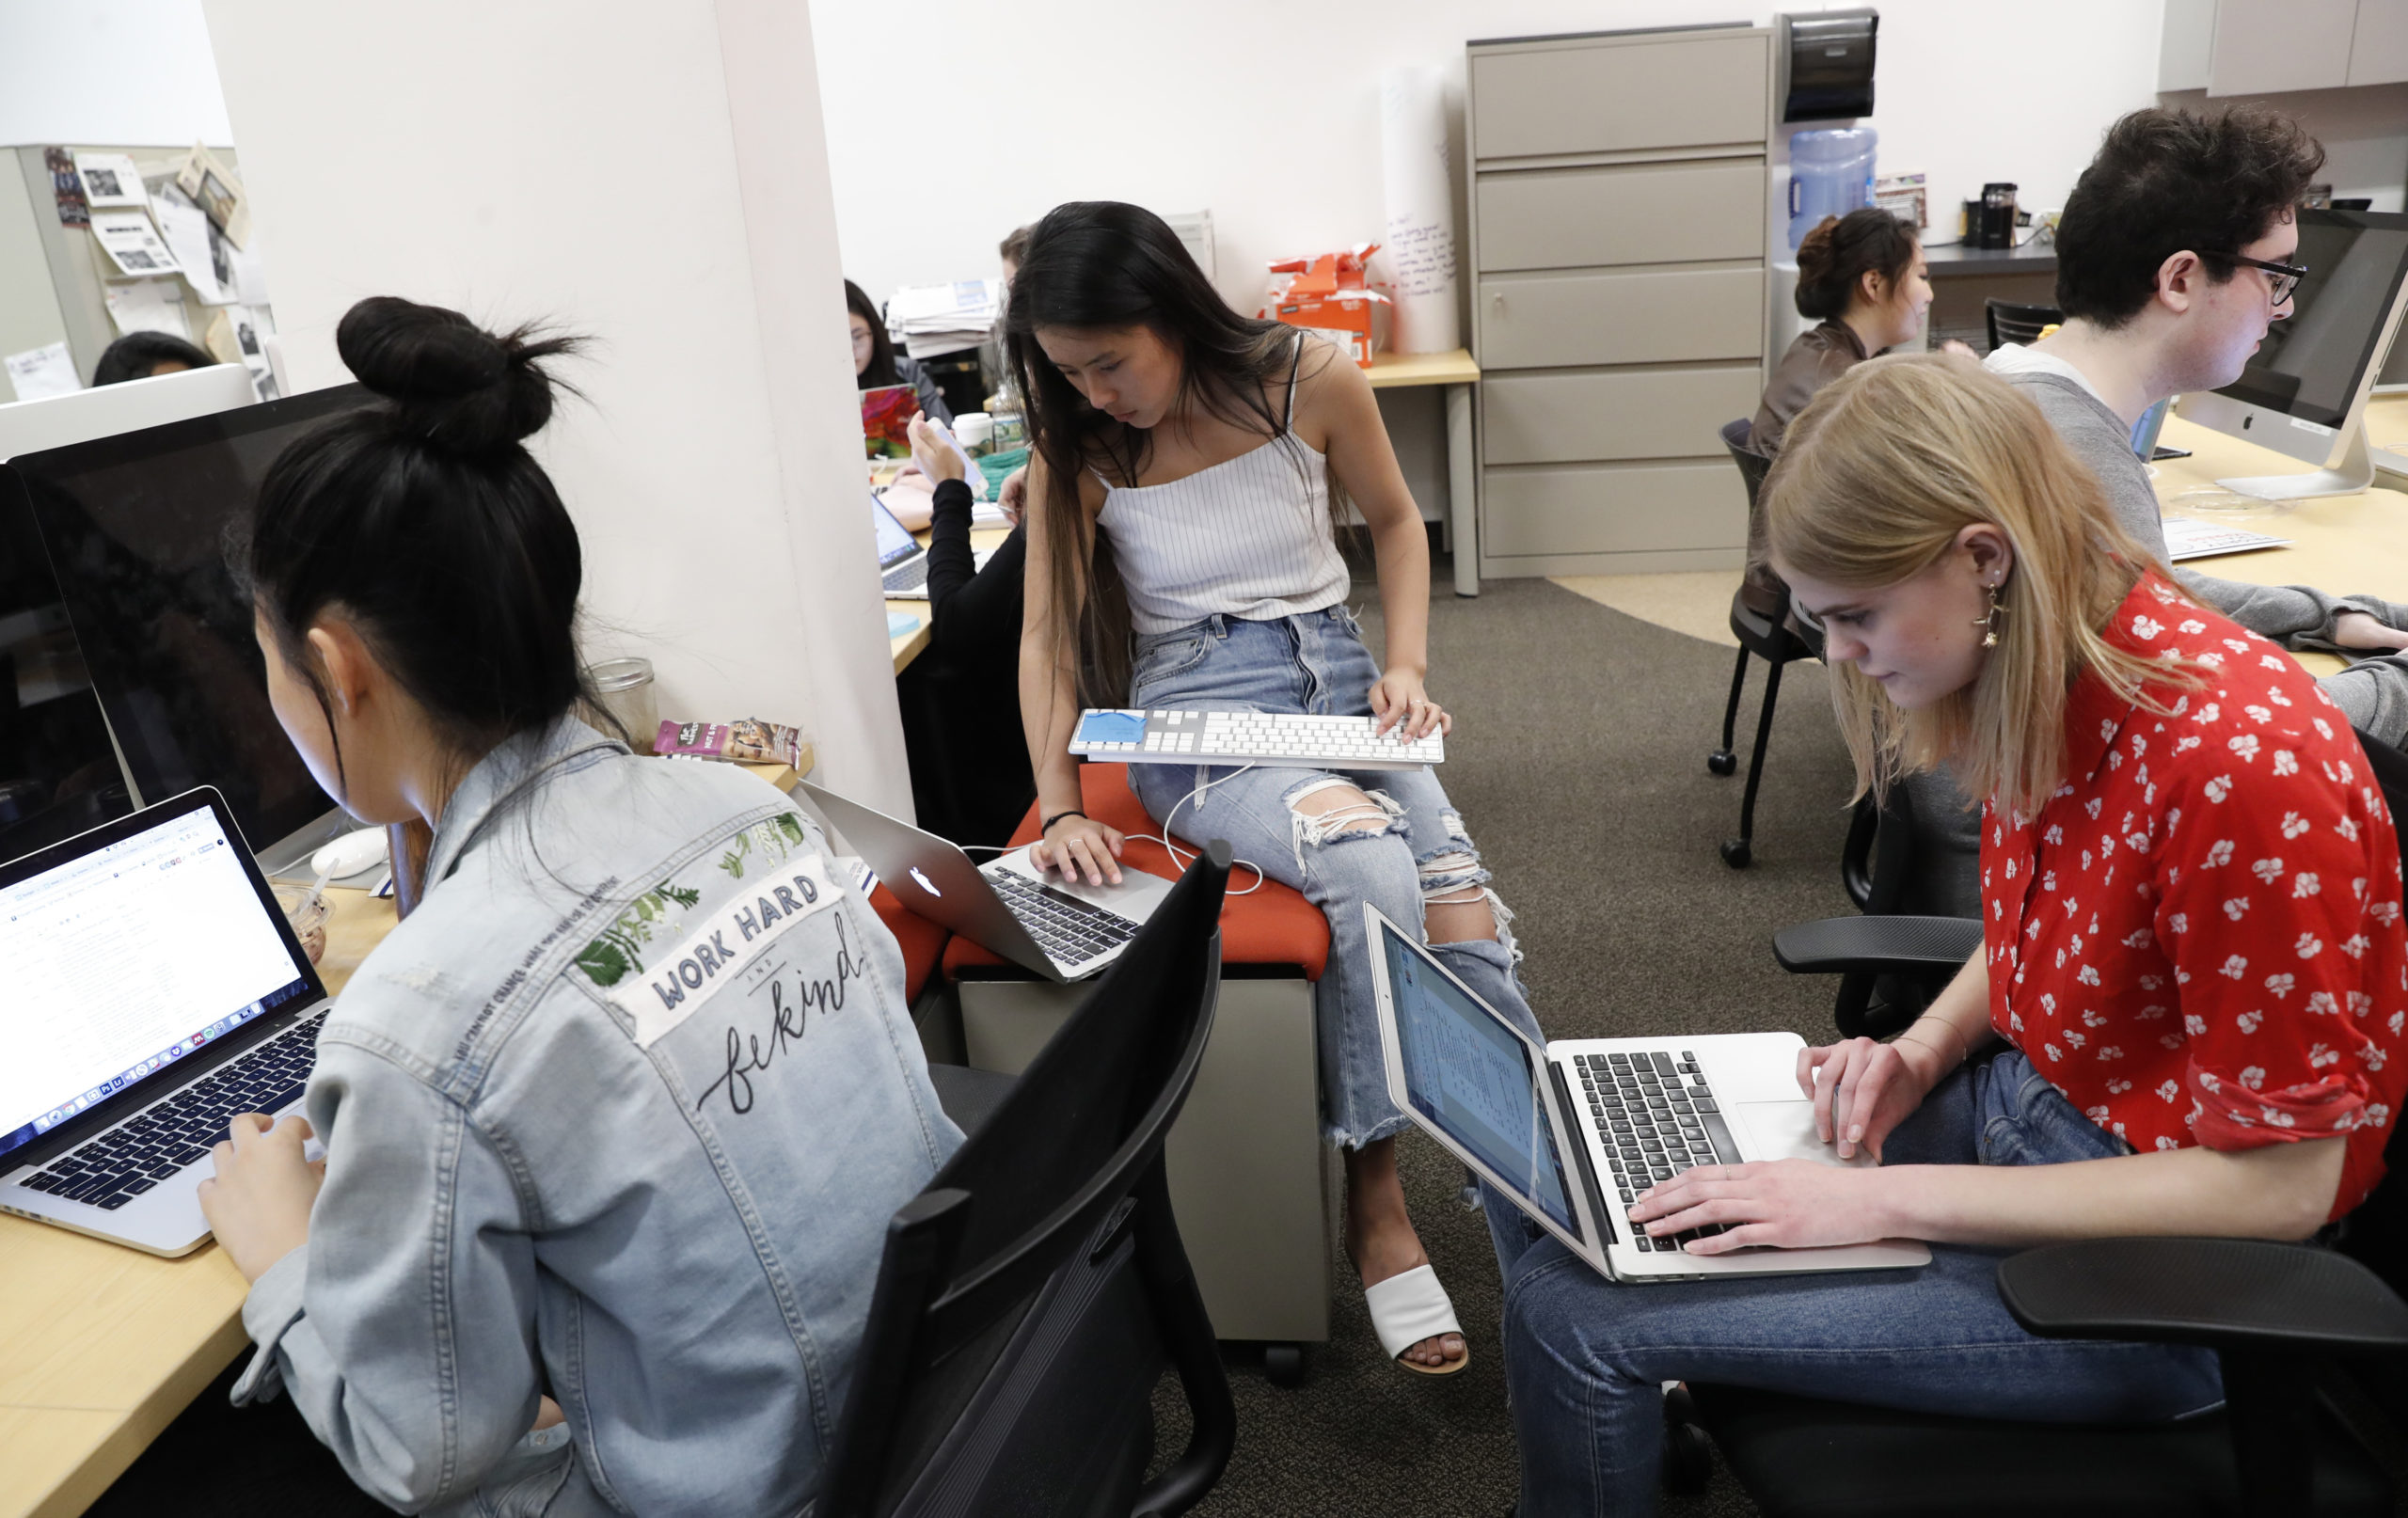 Students at the Washington Square News at New York University work on deadline in the paper's newsroom. Many of the traditional entry paths to journalism, like the private school newspaper route, are inaccessible for most people